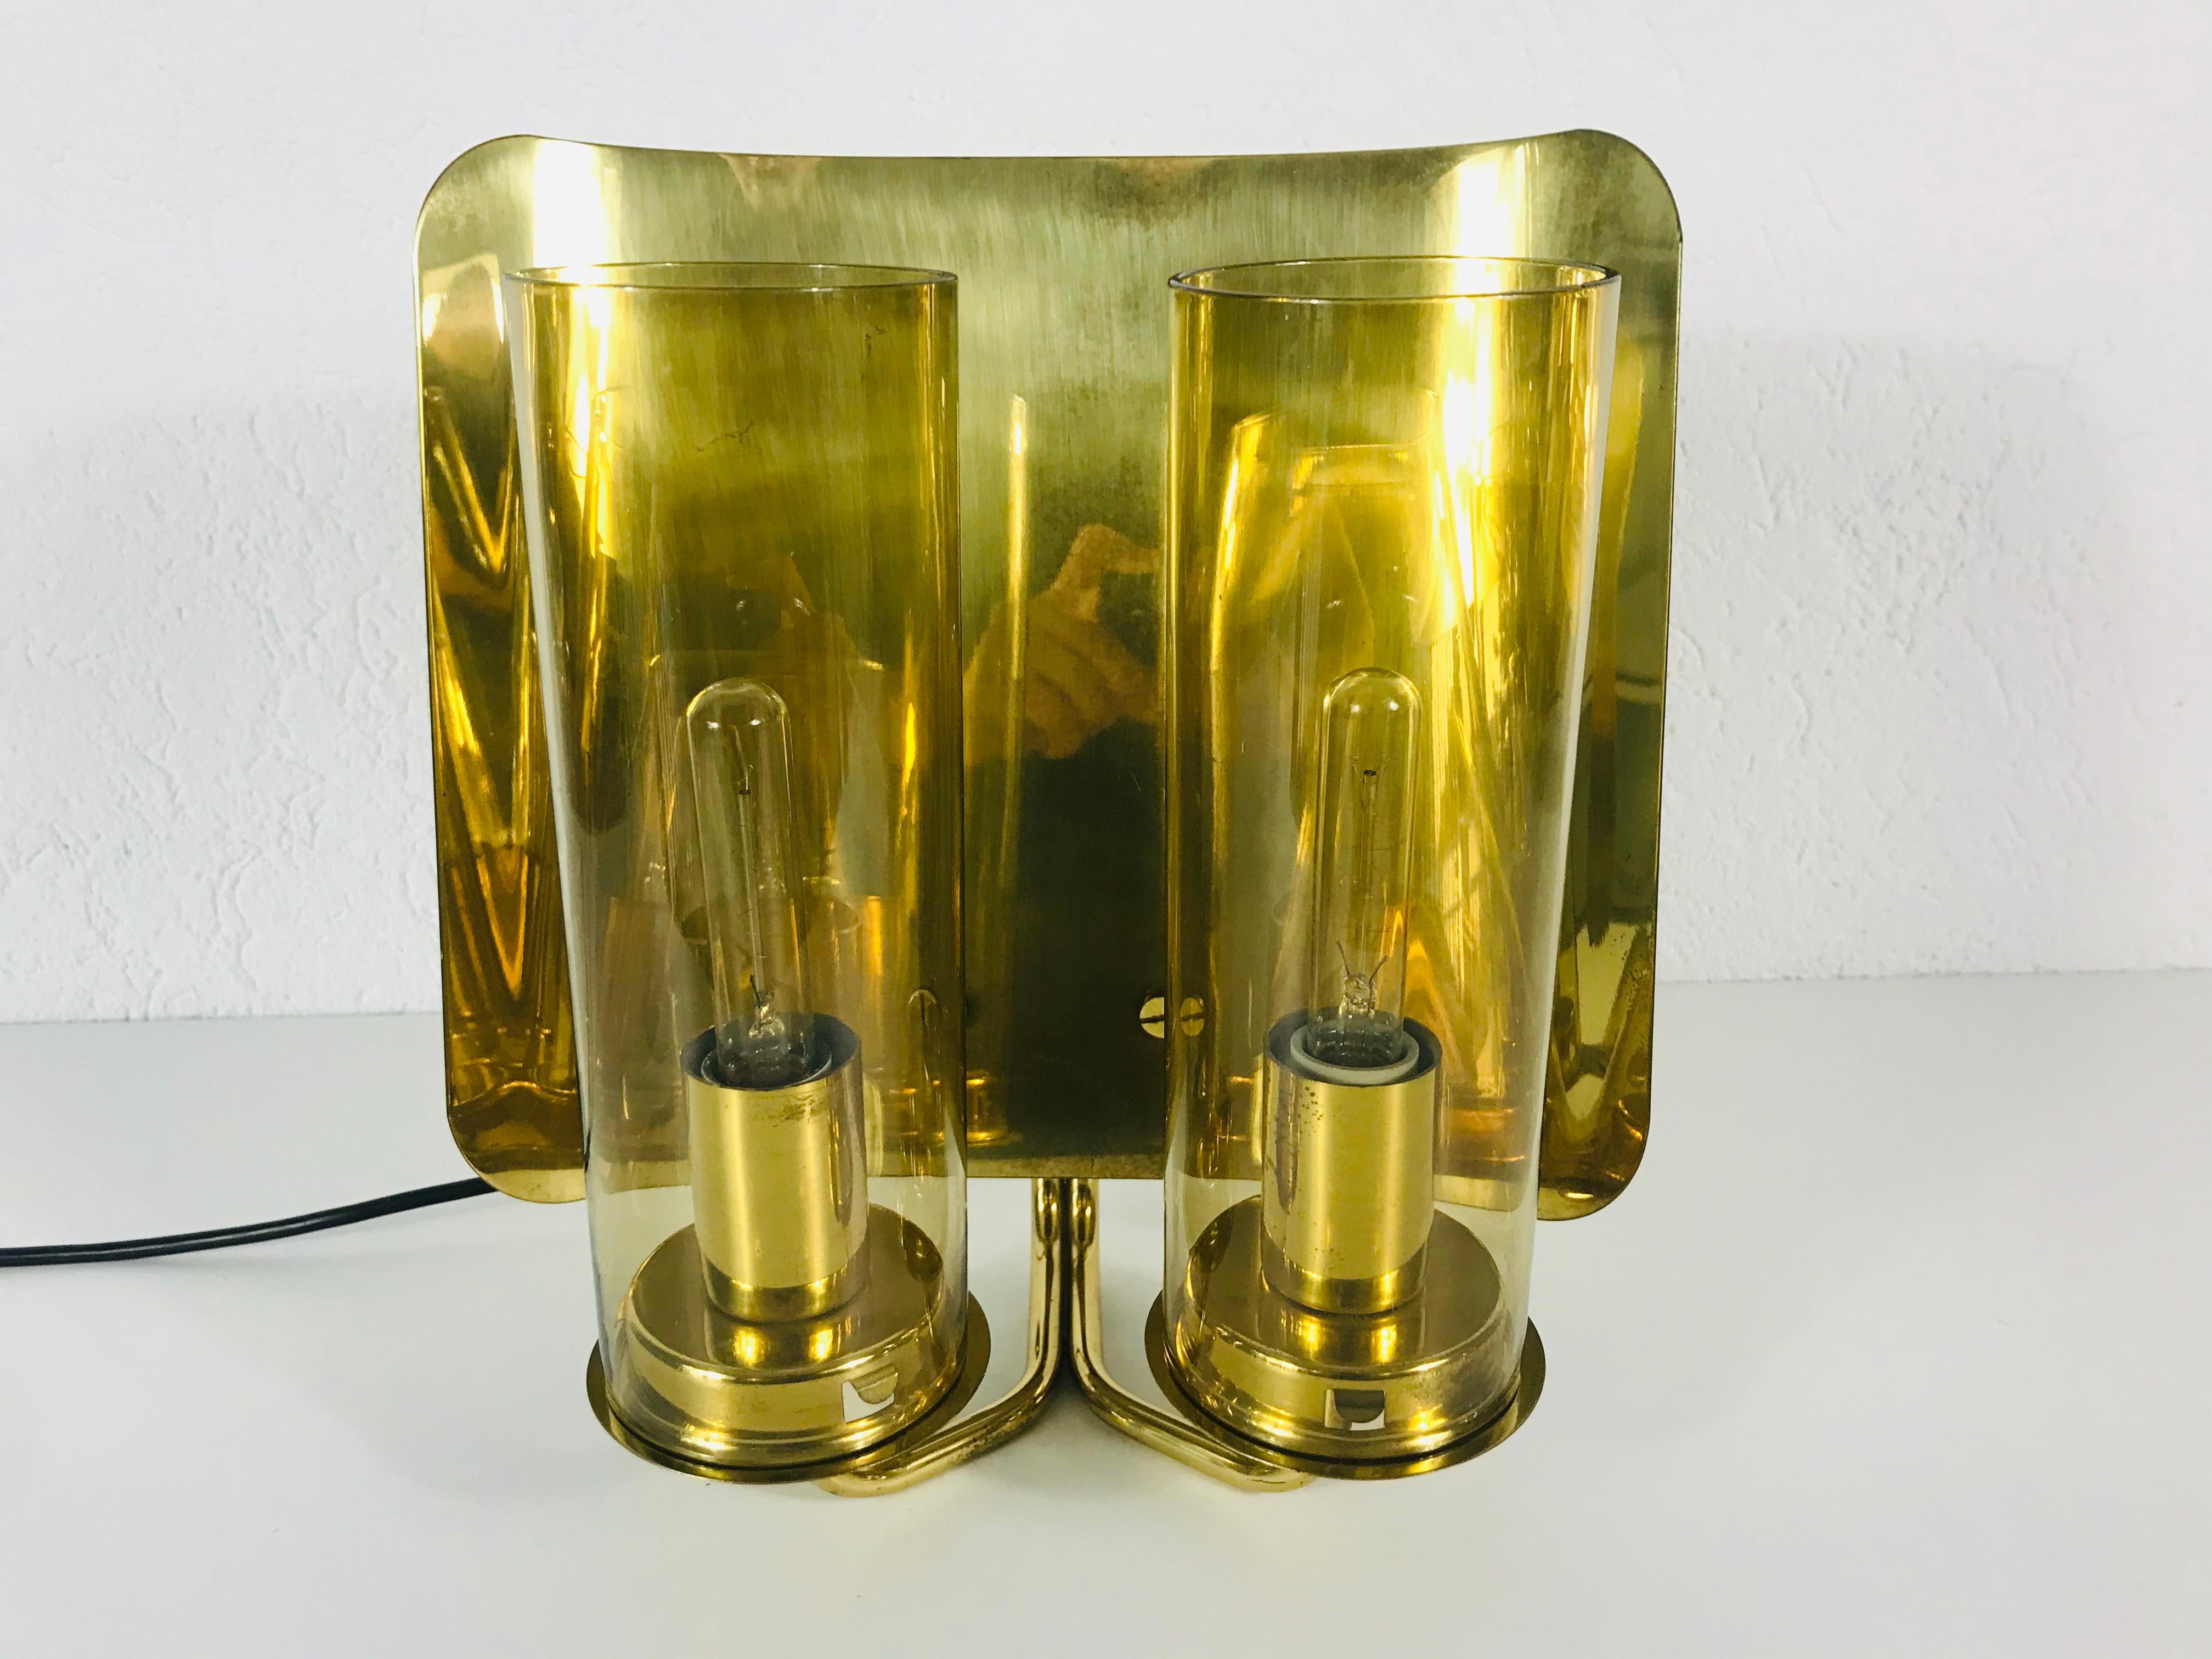 Pair of Mid-Century Modern Brass Sconces by Hans-Agne Jakobsson, Sweden, 1960s For Sale 1